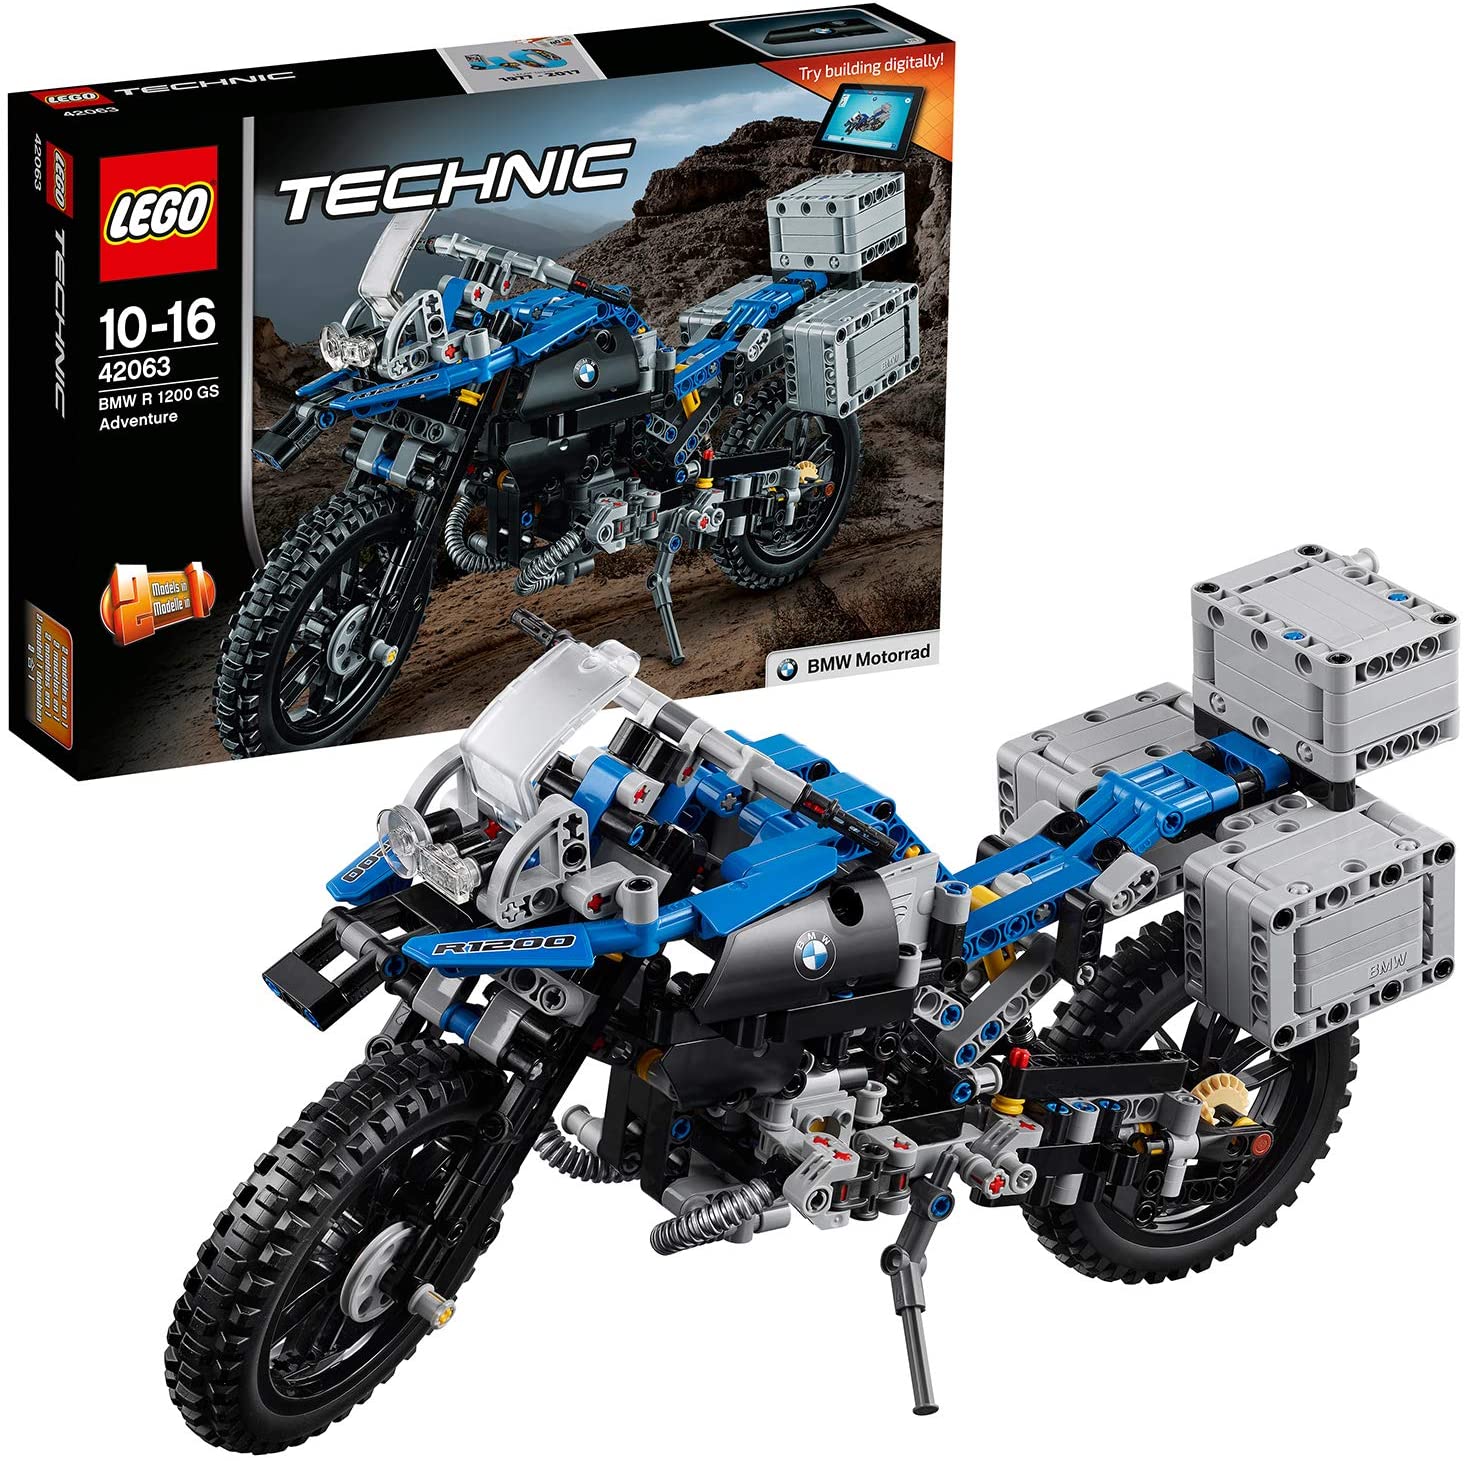 7 Best LEGO Motorcycle Sets 2022 - Buying Guide & Reviews 5